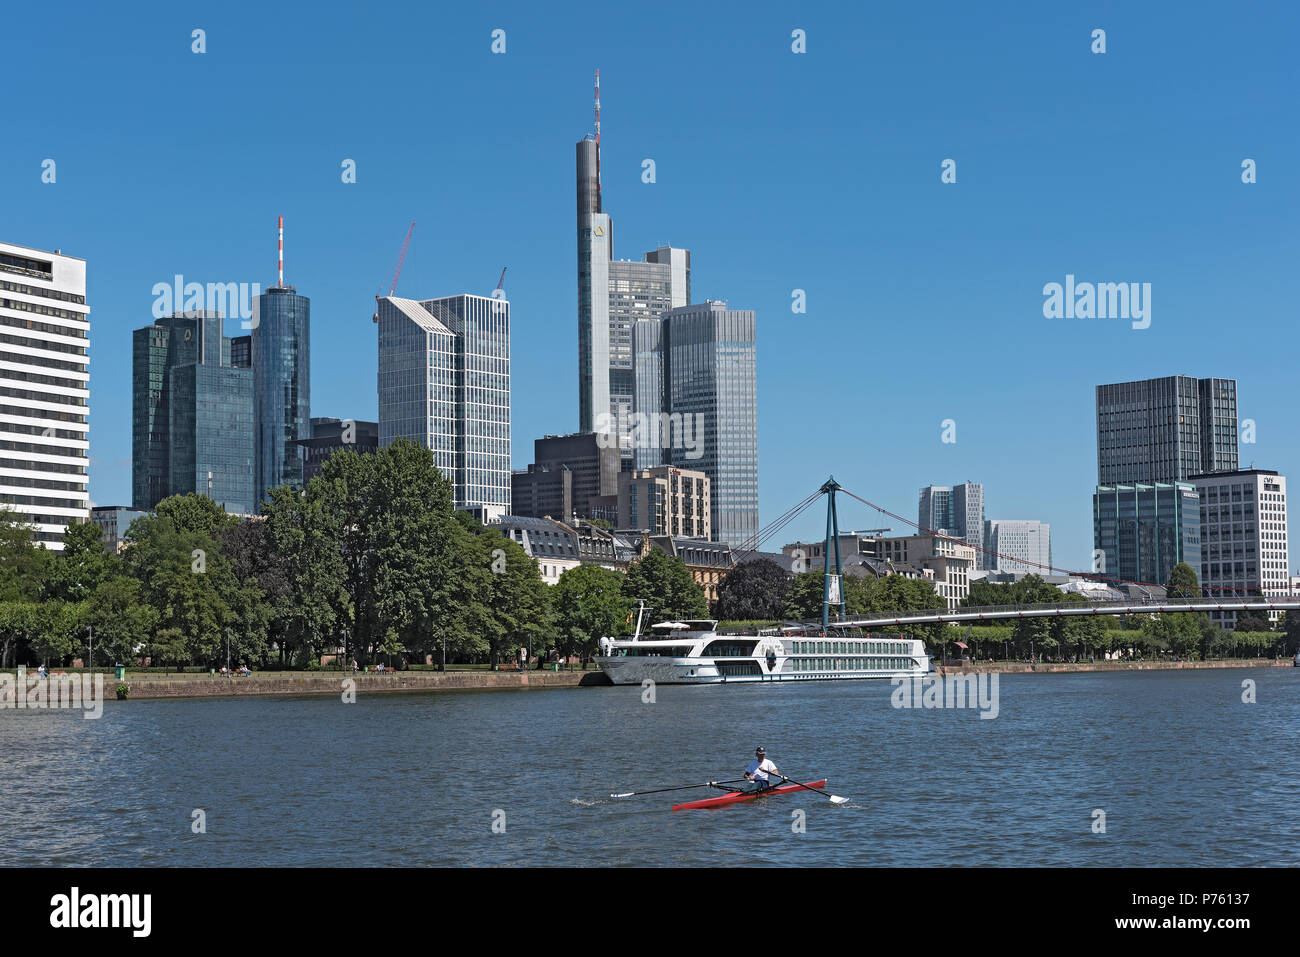 Rower in red boat on the main river in front of the skyline, frankfurt, germany Stock Photo